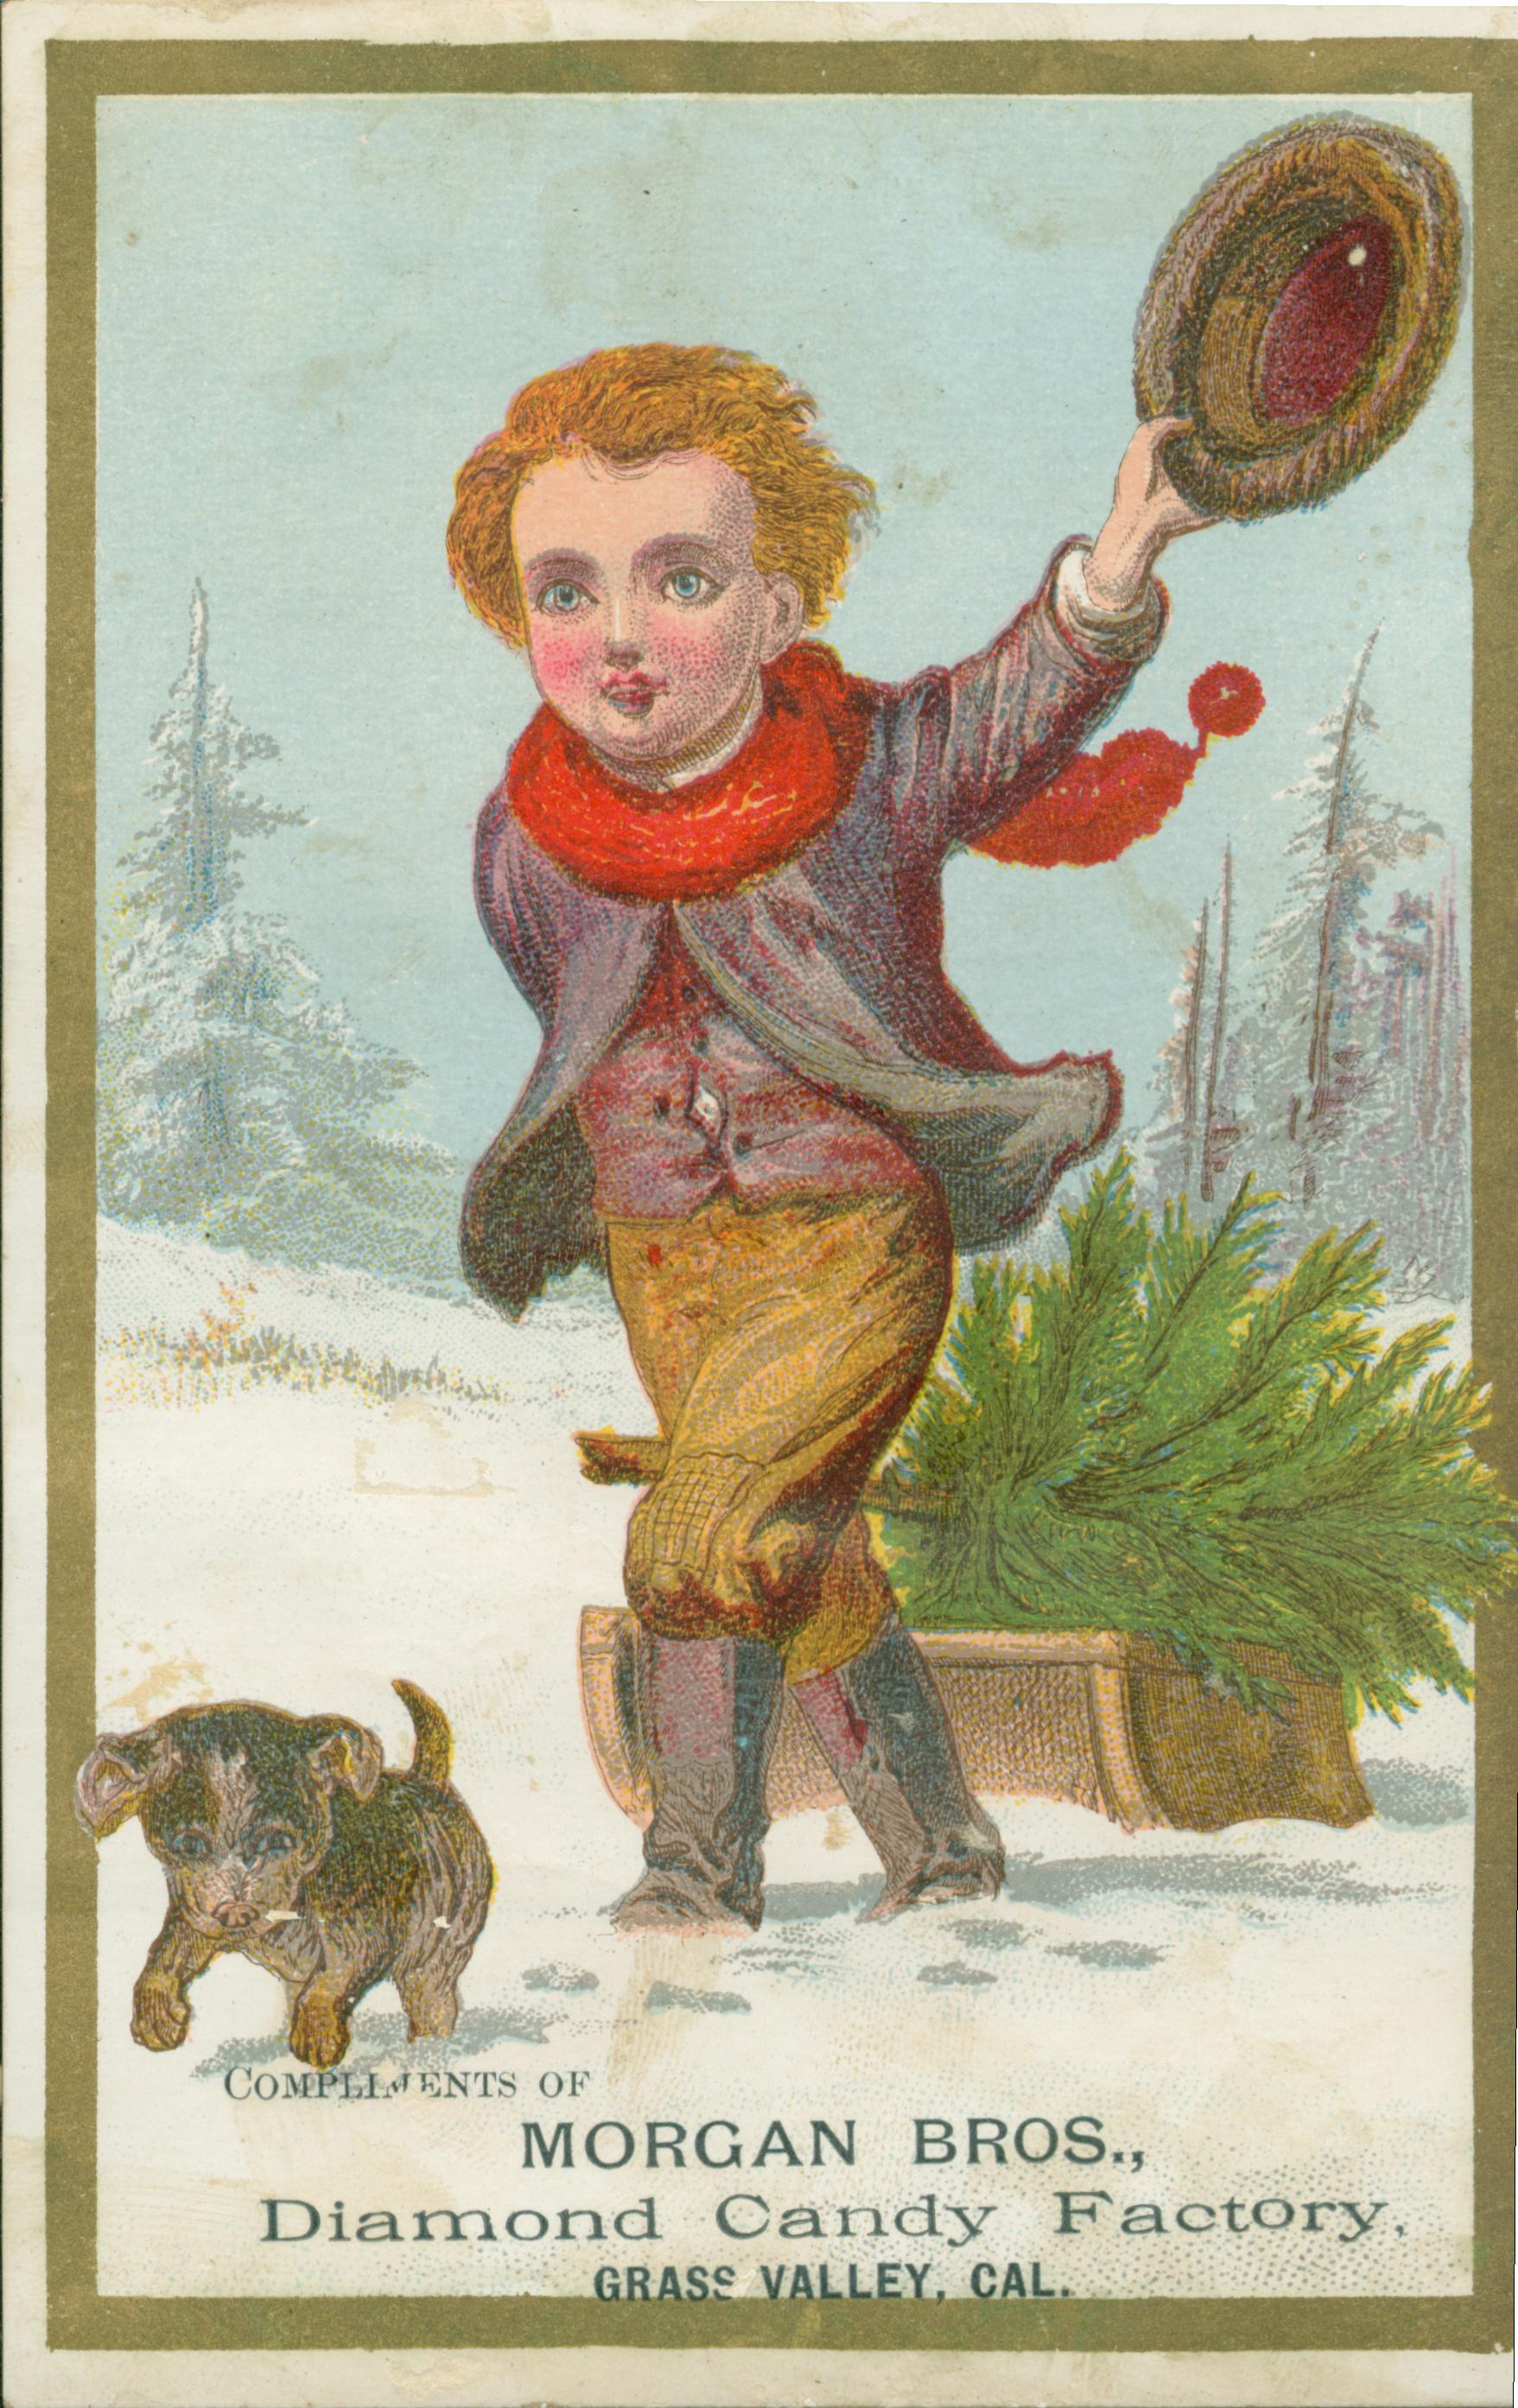 This trade card shows a small boy and his dog, dragging a sled with a small pine tree loaded onto it through the snow.